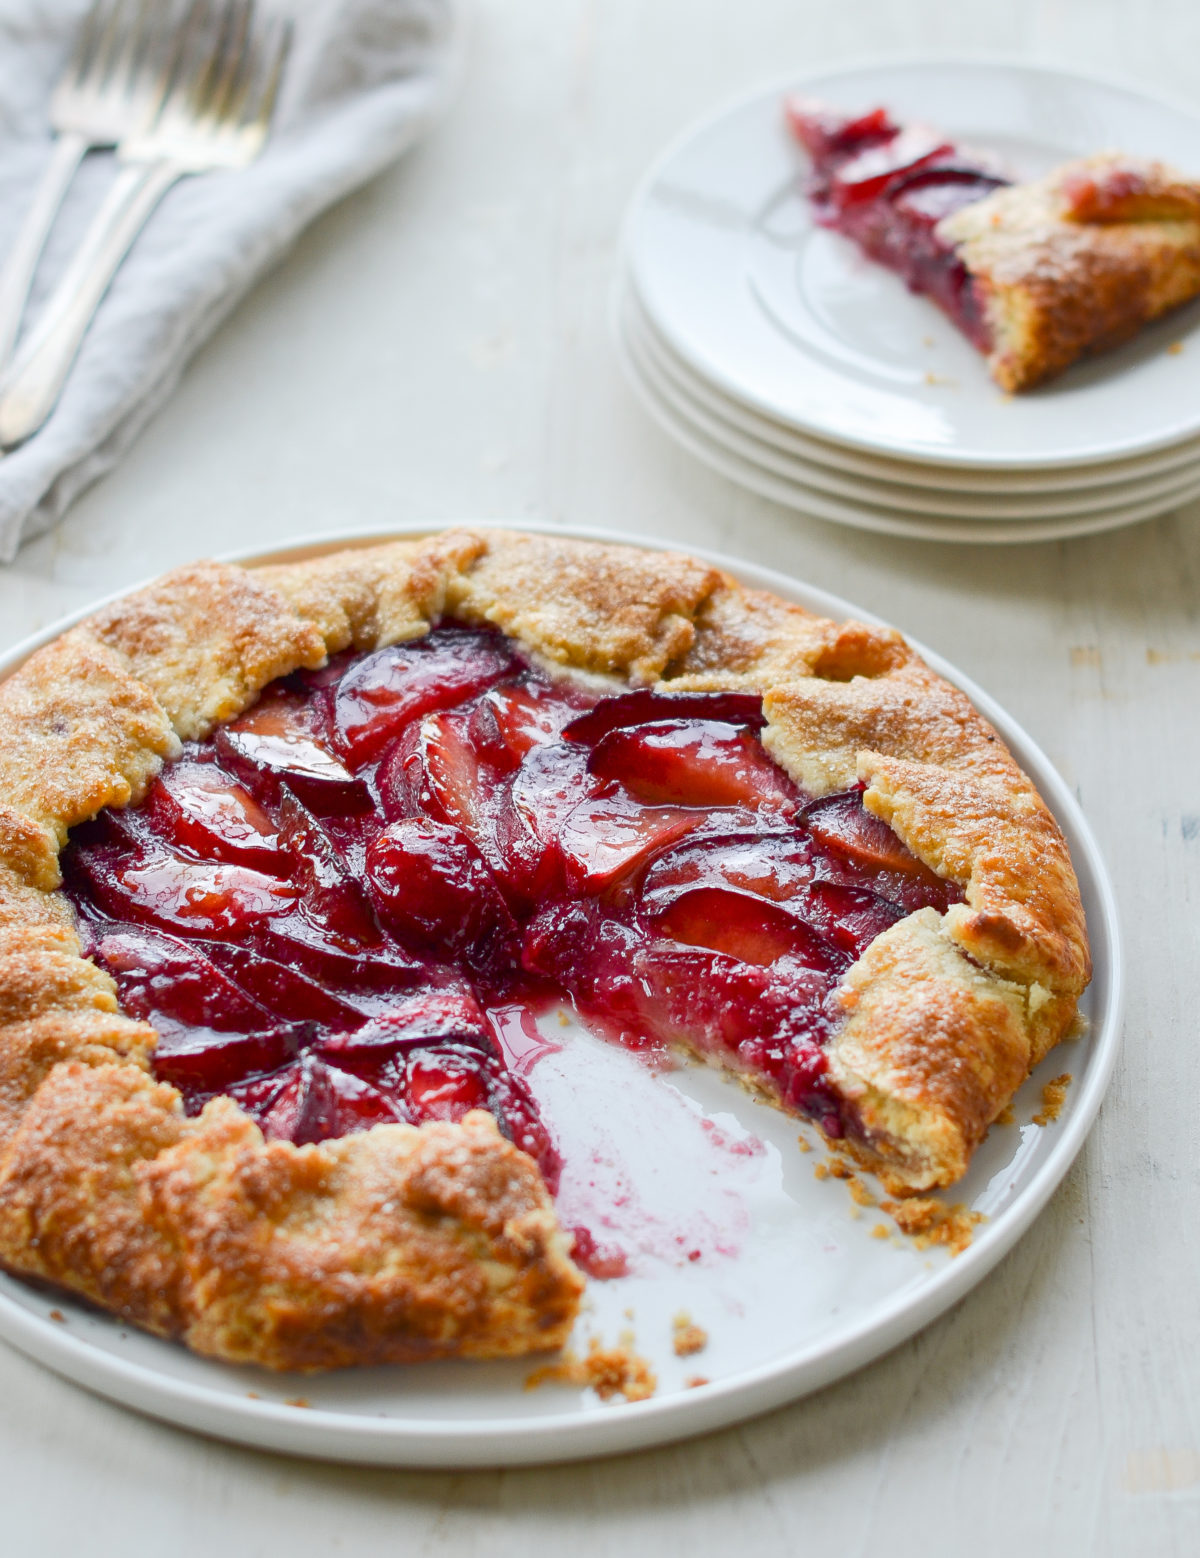 Plum galette on a plate missing a slice.